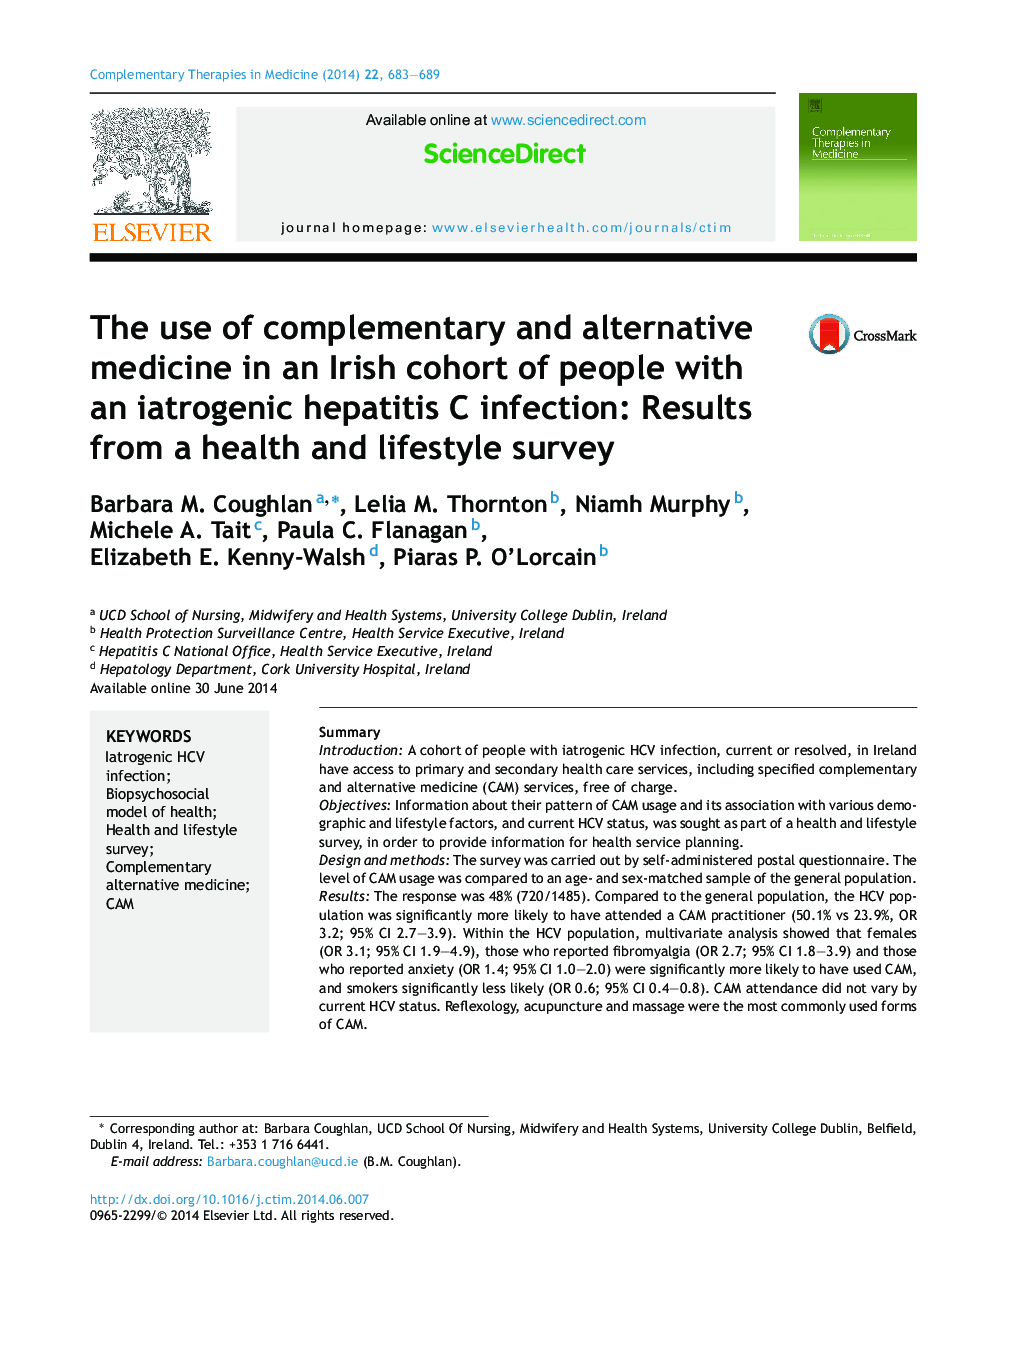 The use of complementary and alternative medicine in an Irish cohort of people with an iatrogenic hepatitis C infection: Results from a health and lifestyle survey